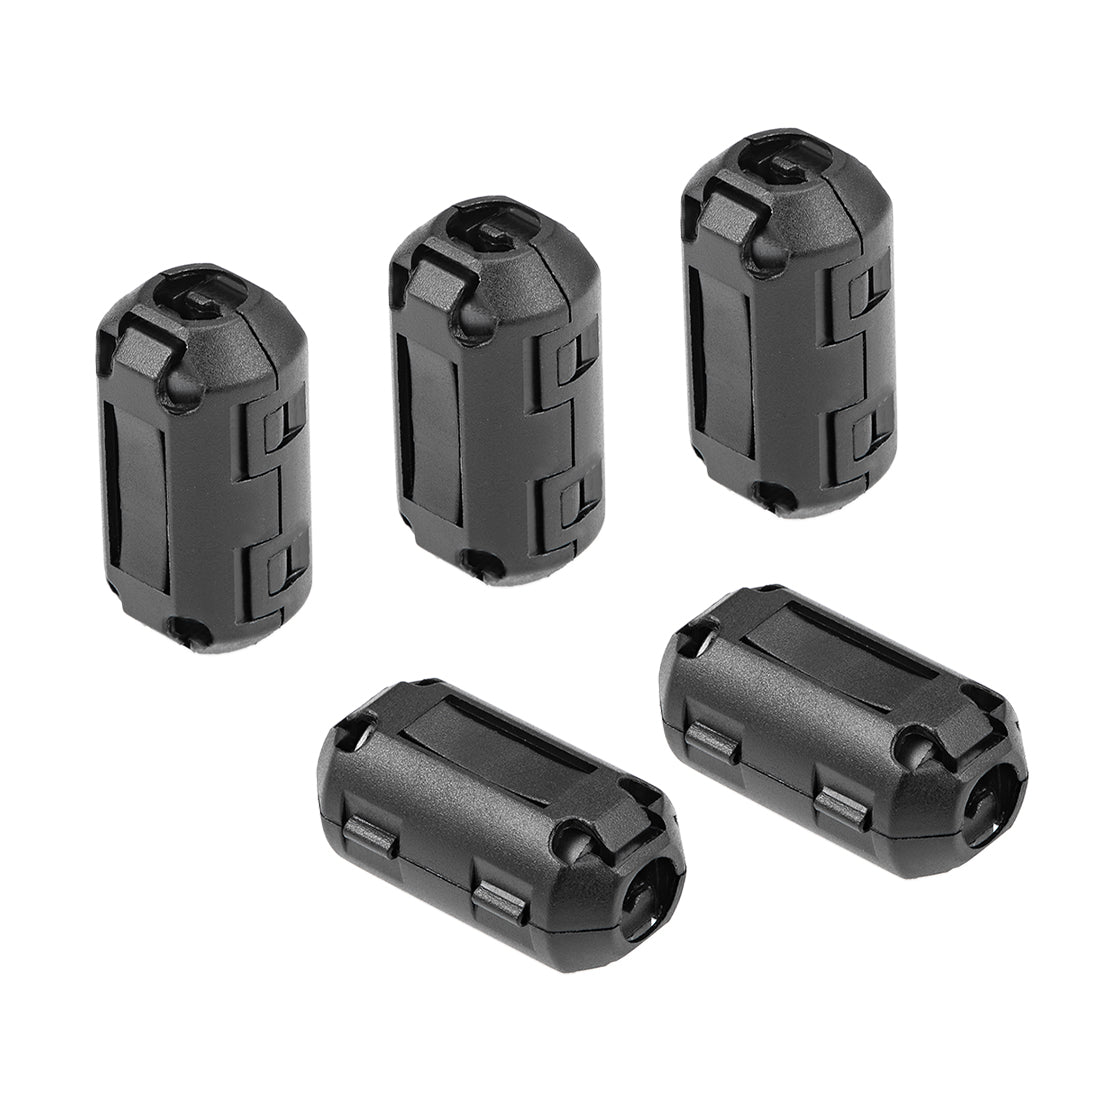 uxcell Uxcell 7mm Ferrite Cores Ring Clip-On RFI EMI Noise Suppression Filter Cable Clip, Black 5pcs